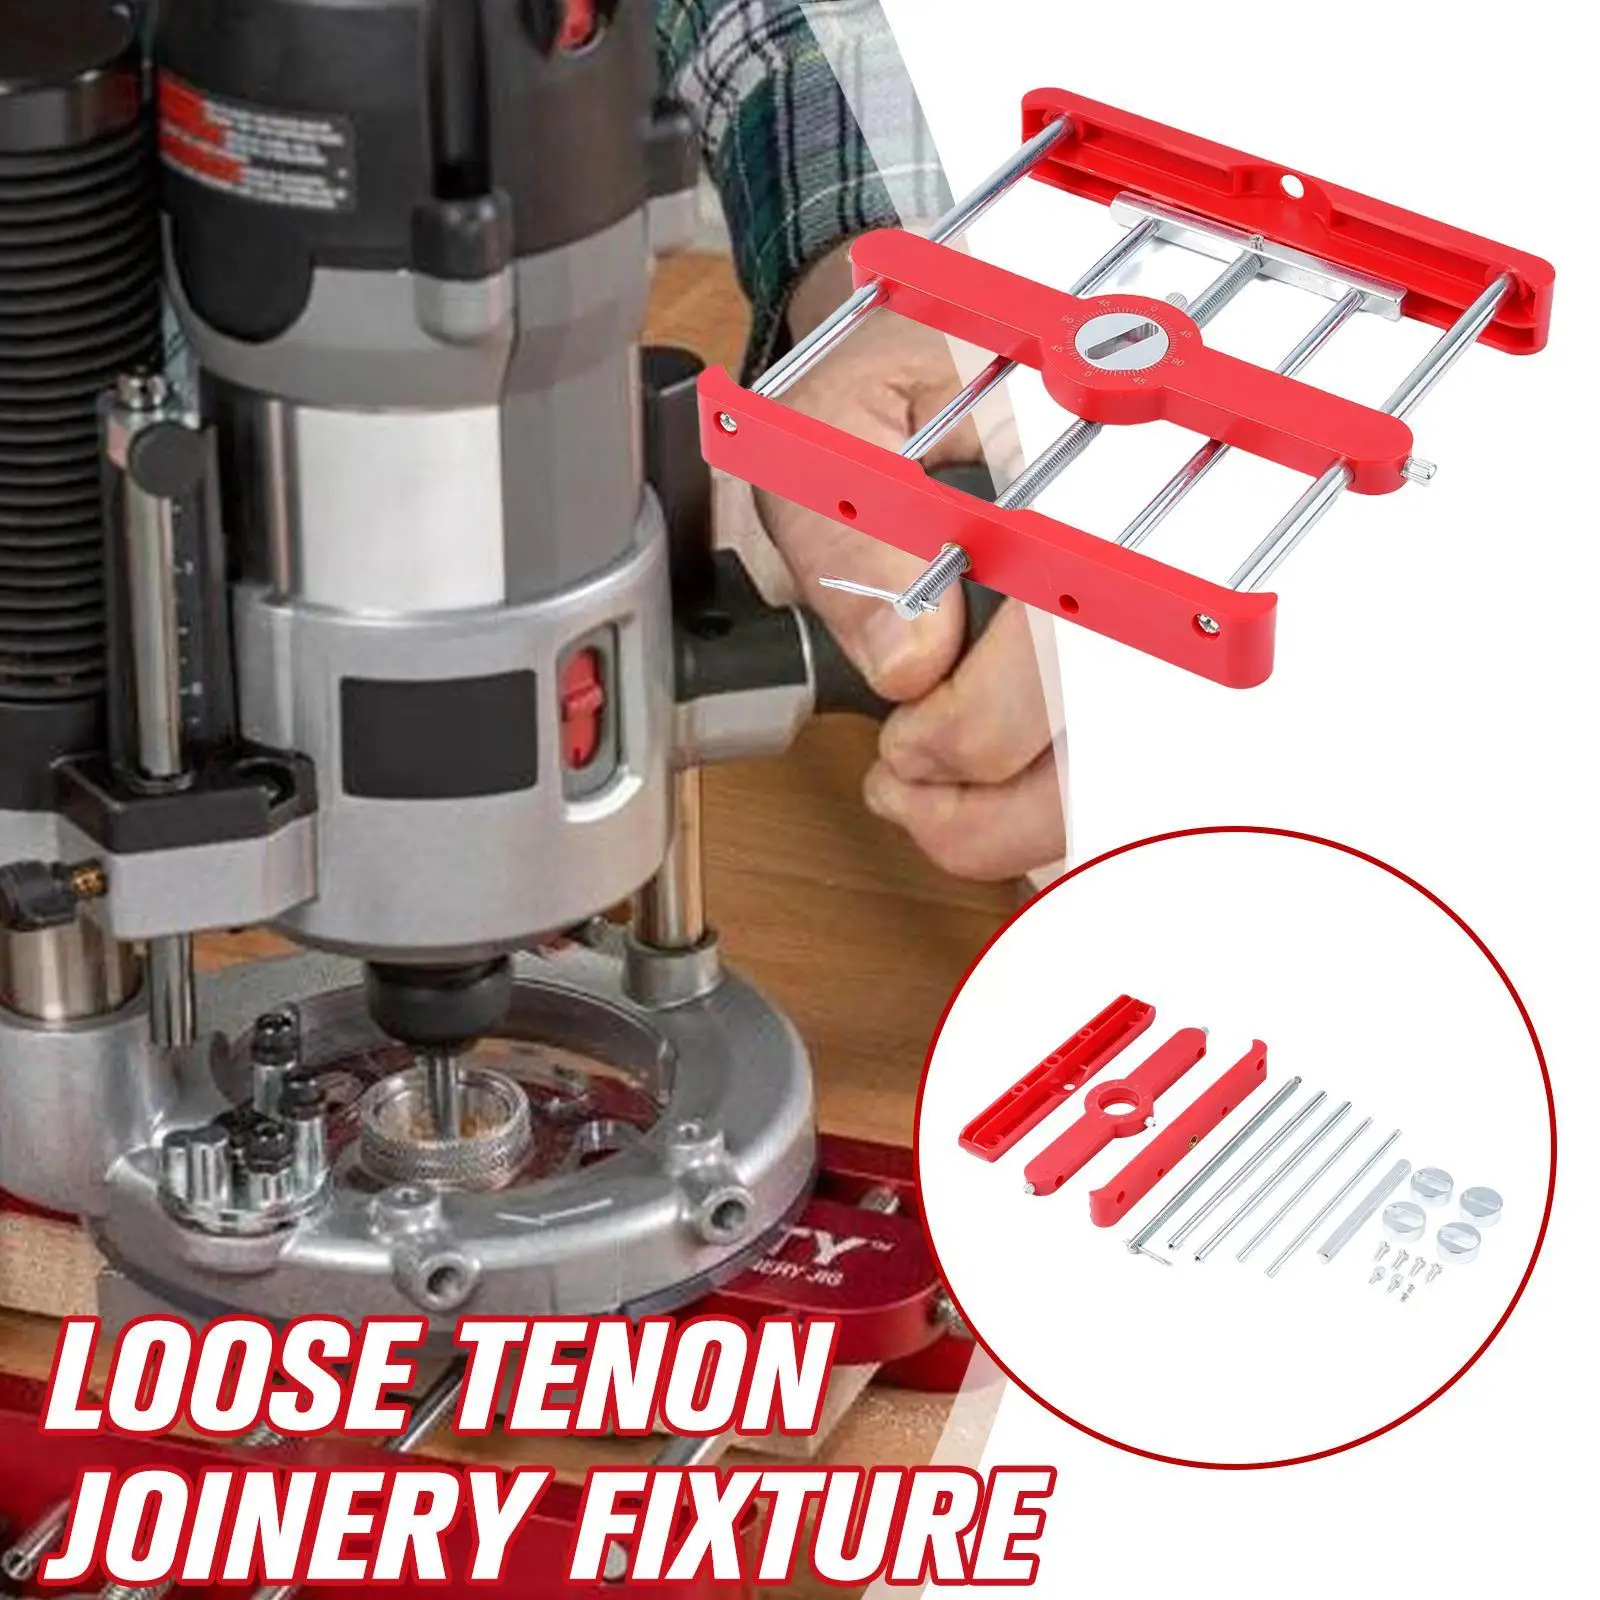 

2 In 1 Punch Locator Precision Mortising Jig And Loose Joinery Jig Home Tools Connector Doweling Tenon Fastener Woodworking R5s0